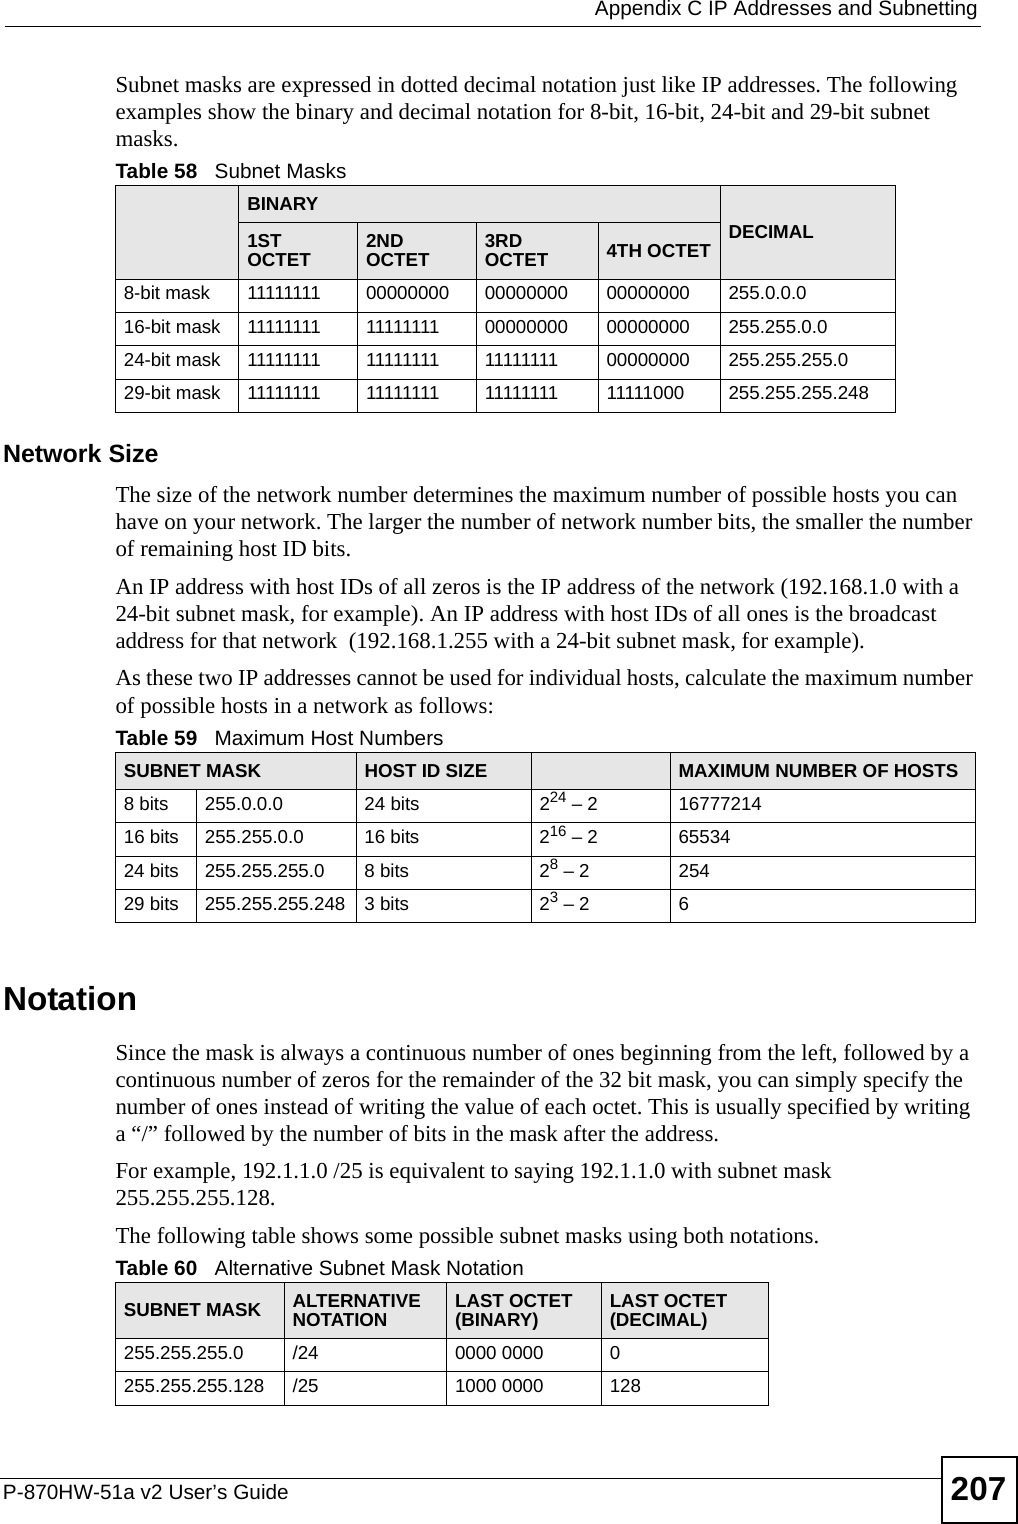  Appendix C IP Addresses and SubnettingP-870HW-51a v2 User’s Guide 207Subnet masks are expressed in dotted decimal notation just like IP addresses. The following examples show the binary and decimal notation for 8-bit, 16-bit, 24-bit and 29-bit subnet masks. Network SizeThe size of the network number determines the maximum number of possible hosts you can have on your network. The larger the number of network number bits, the smaller the number of remaining host ID bits. An IP address with host IDs of all zeros is the IP address of the network (192.168.1.0 with a 24-bit subnet mask, for example). An IP address with host IDs of all ones is the broadcast address for that network  (192.168.1.255 with a 24-bit subnet mask, for example).As these two IP addresses cannot be used for individual hosts, calculate the maximum number of possible hosts in a network as follows:NotationSince the mask is always a continuous number of ones beginning from the left, followed by a continuous number of zeros for the remainder of the 32 bit mask, you can simply specify the number of ones instead of writing the value of each octet. This is usually specified by writing a “/” followed by the number of bits in the mask after the address. For example, 192.1.1.0 /25 is equivalent to saying 192.1.1.0 with subnet mask 255.255.255.128. The following table shows some possible subnet masks using both notations. Table 58   Subnet MasksBINARYDECIMAL1ST OCTET 2ND OCTET 3RD OCTET 4TH OCTET8-bit mask 11111111 00000000 00000000 00000000 255.0.0.016-bit mask 11111111 11111111 00000000 00000000 255.255.0.024-bit mask 11111111 11111111 11111111 00000000 255.255.255.029-bit mask 11111111 11111111 11111111 11111000 255.255.255.248Table 59   Maximum Host NumbersSUBNET MASK HOST ID SIZE MAXIMUM NUMBER OF HOSTS8 bits 255.0.0.0 24 bits 224 – 2 1677721416 bits 255.255.0.0 16 bits 216 – 2 6553424 bits 255.255.255.0 8 bits 28 – 2 25429 bits 255.255.255.248 3 bits 23 – 2 6Table 60   Alternative Subnet Mask NotationSUBNET MASK ALTERNATIVE NOTATION LAST OCTET (BINARY) LAST OCTET (DECIMAL)255.255.255.0 /24 0000 0000 0255.255.255.128 /25 1000 0000 128